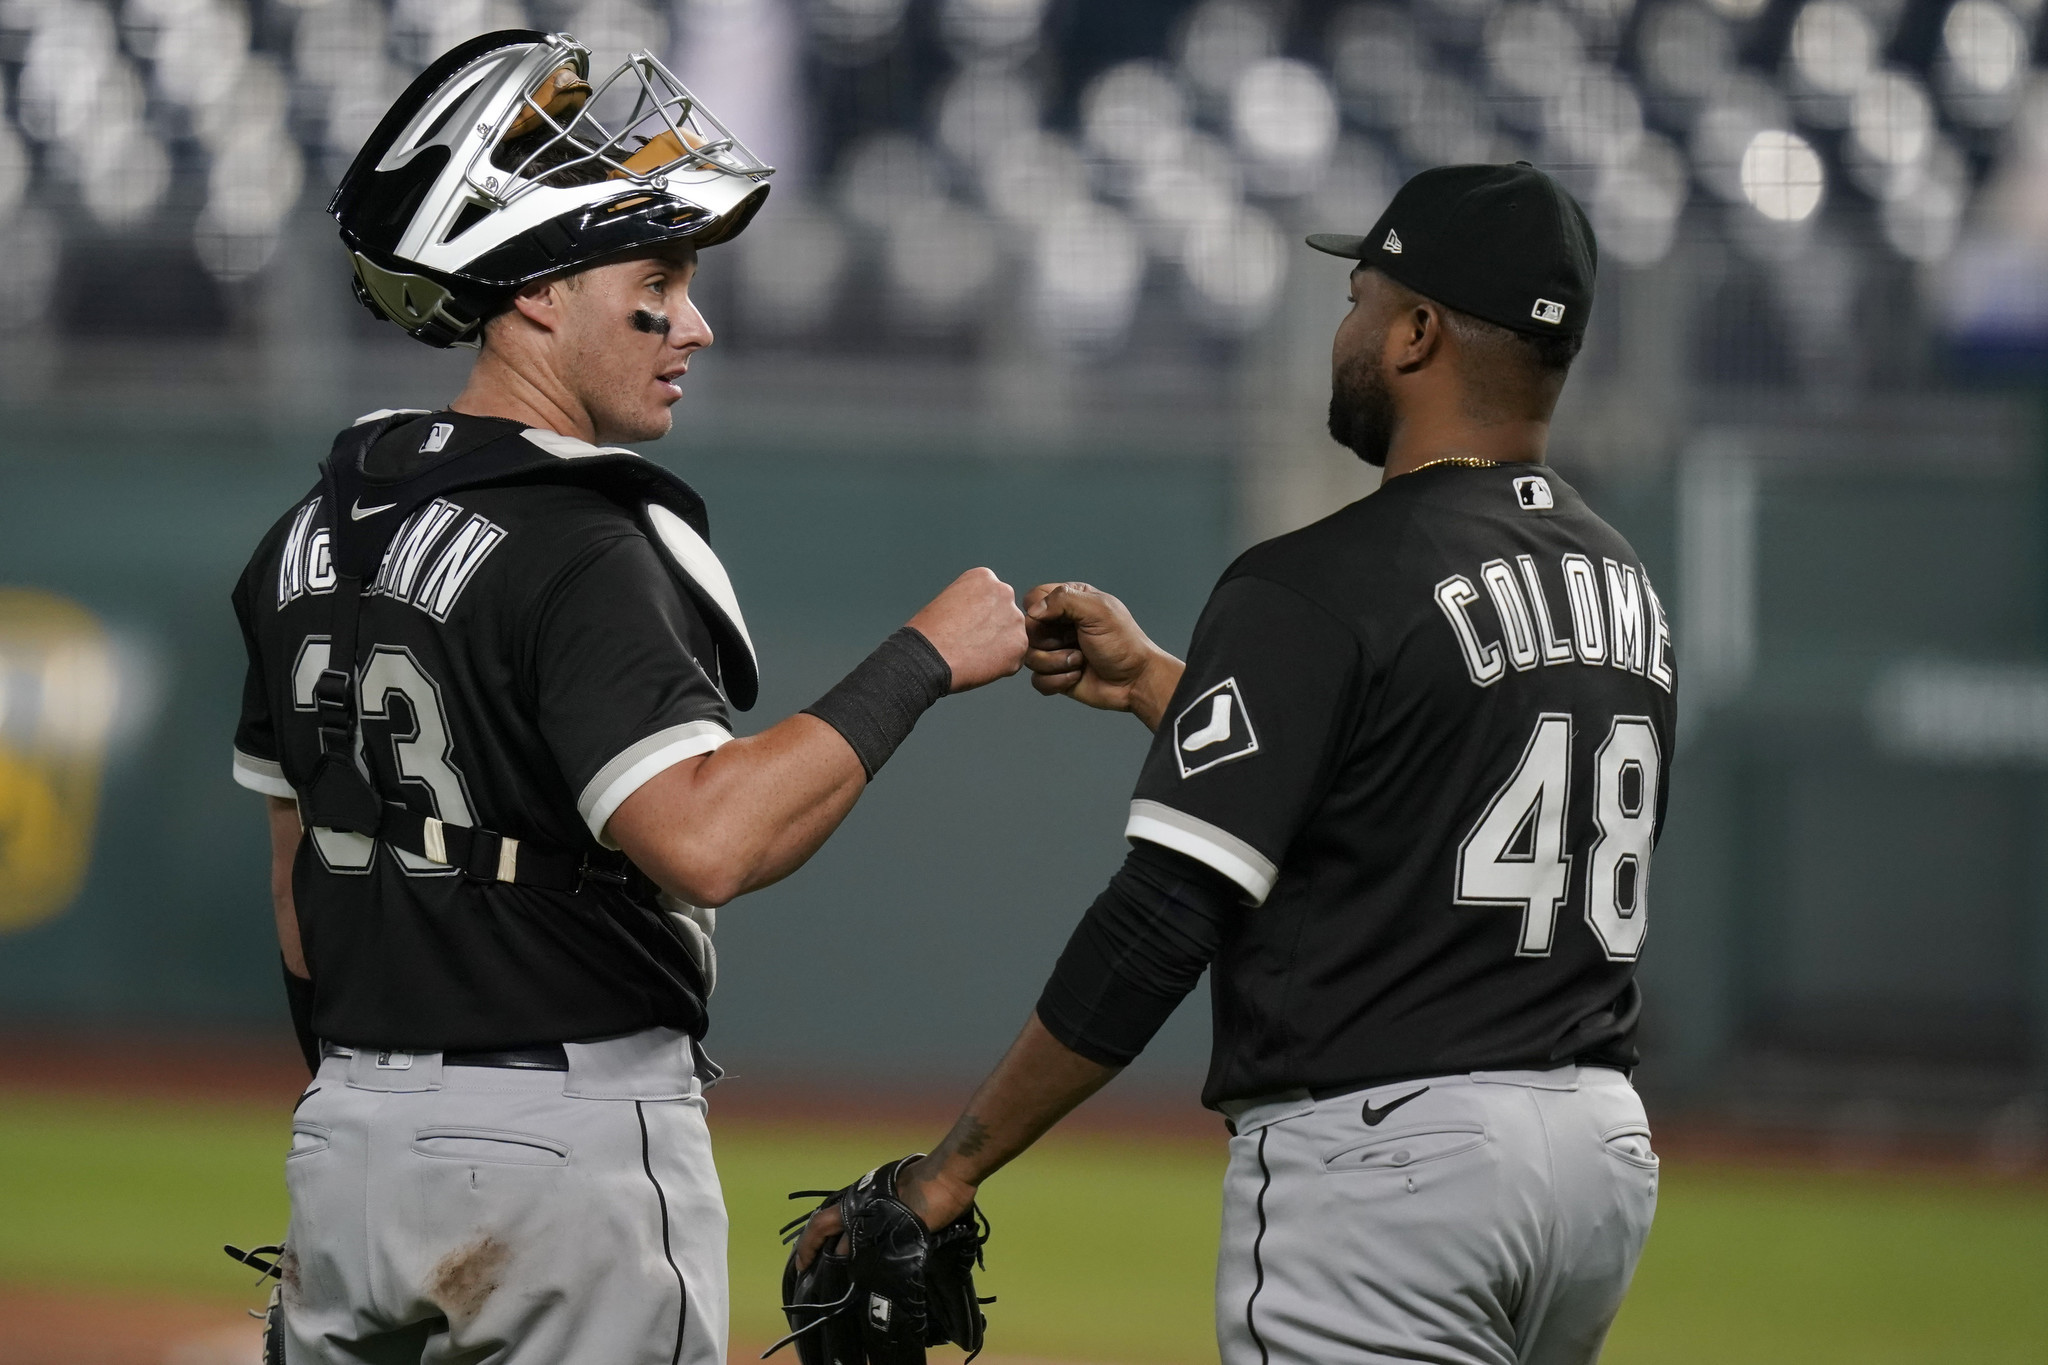 White Sox roster outlook for 2022